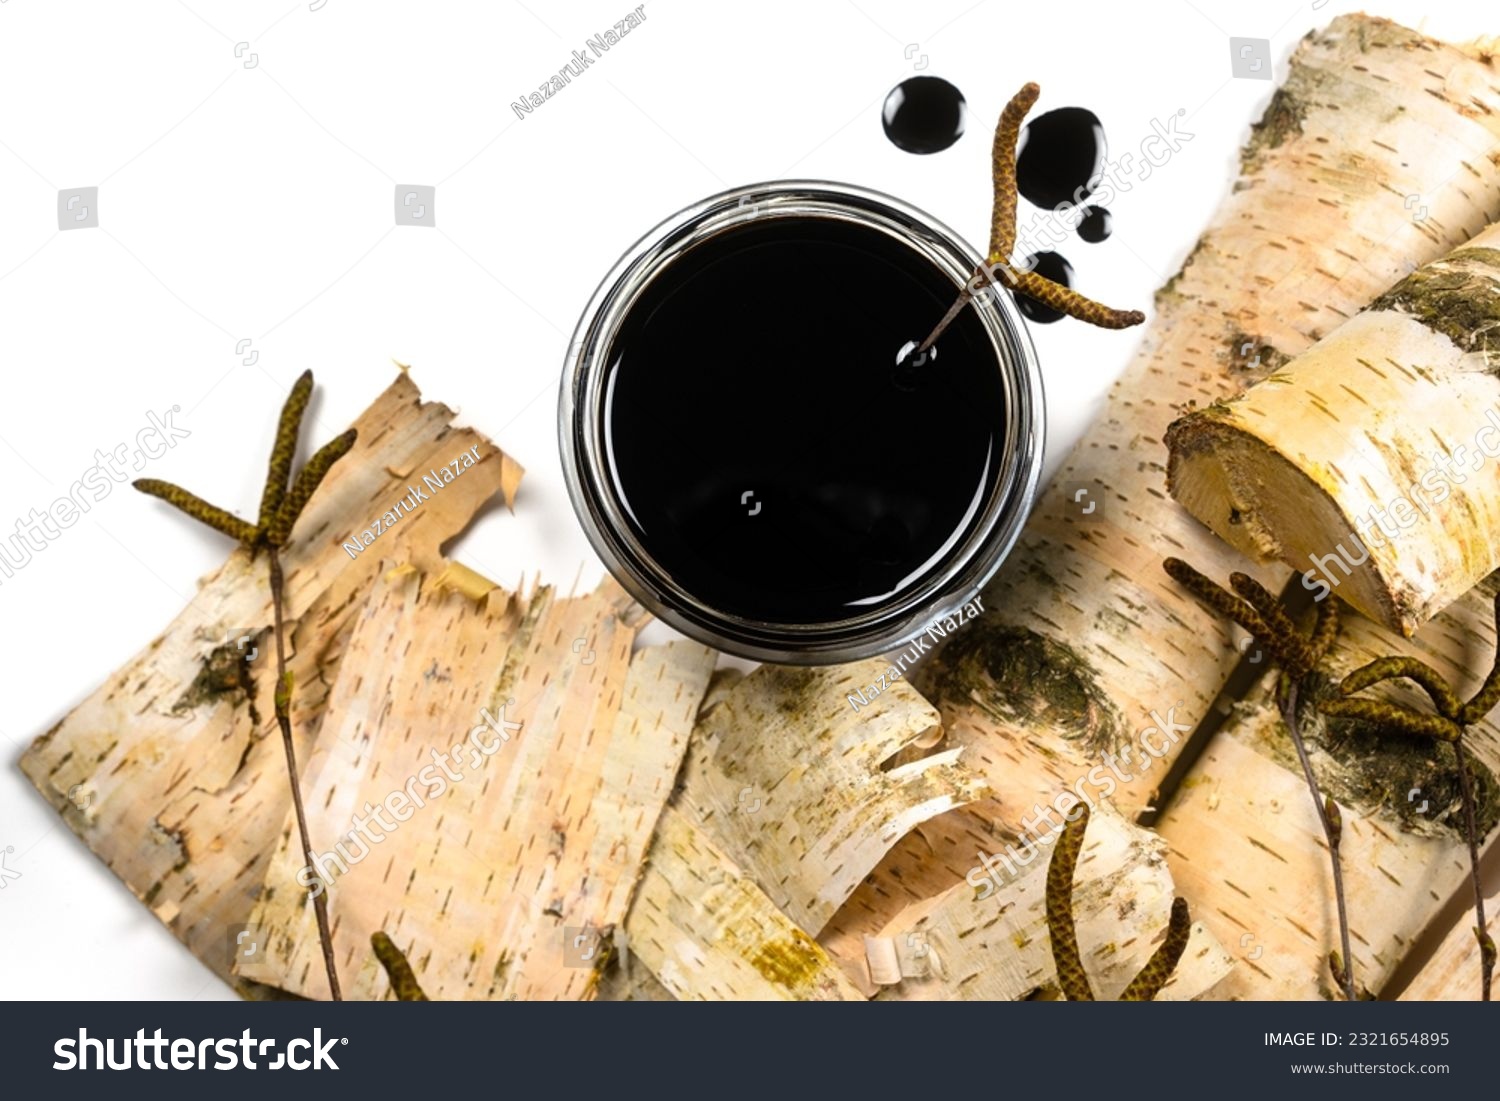 Birch tar or pitch in a jar and birch tree bark on white background. Wood tar. Liquid mineral tar from birch bark #2321654895